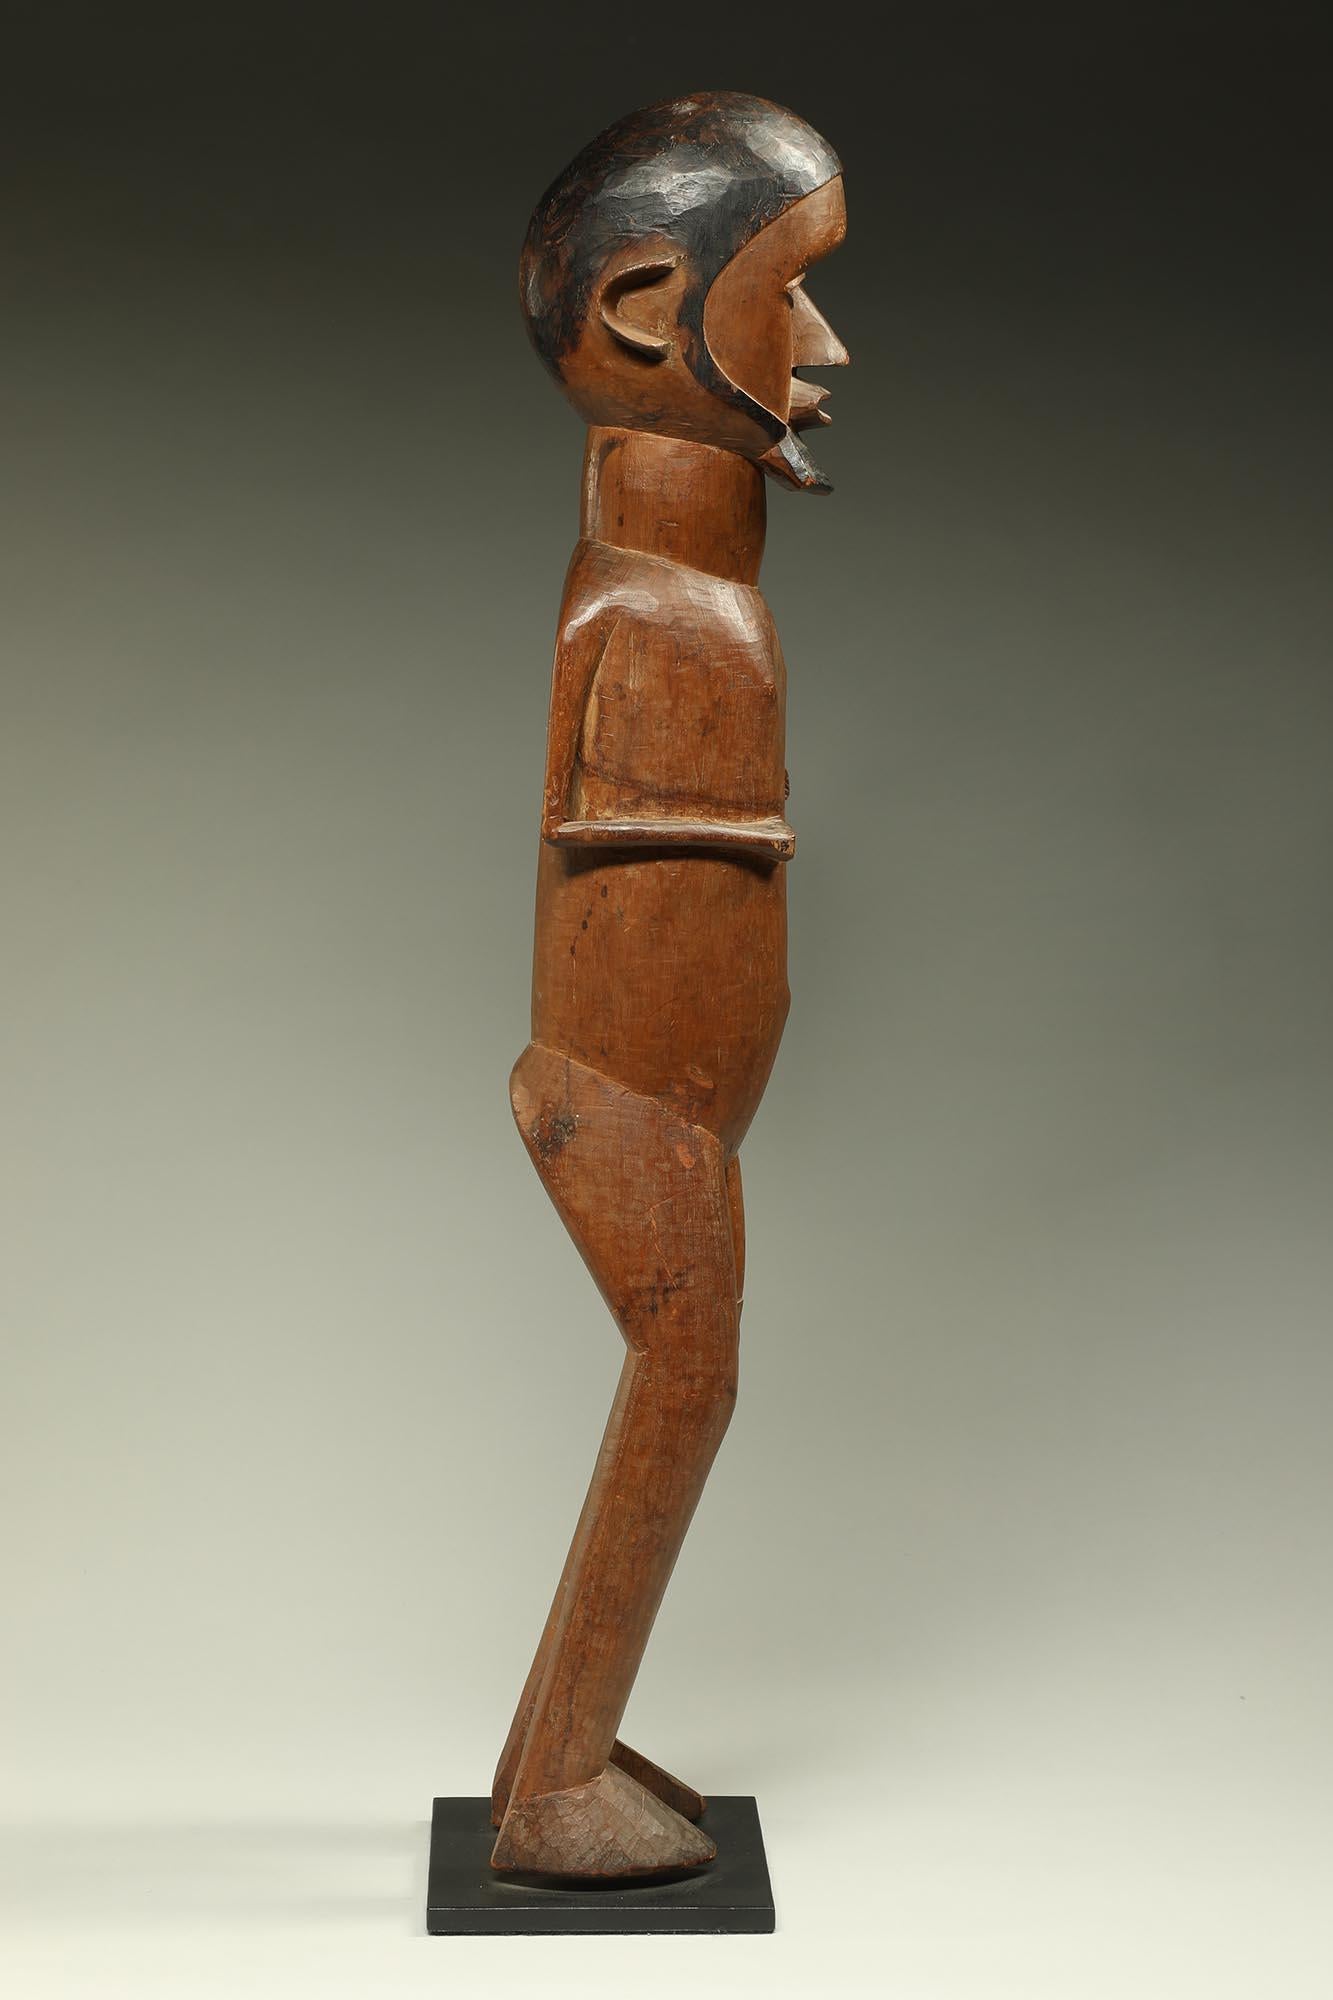 Large standing male Teke figure with expressive face, beard, Congo, DRC Africa 1